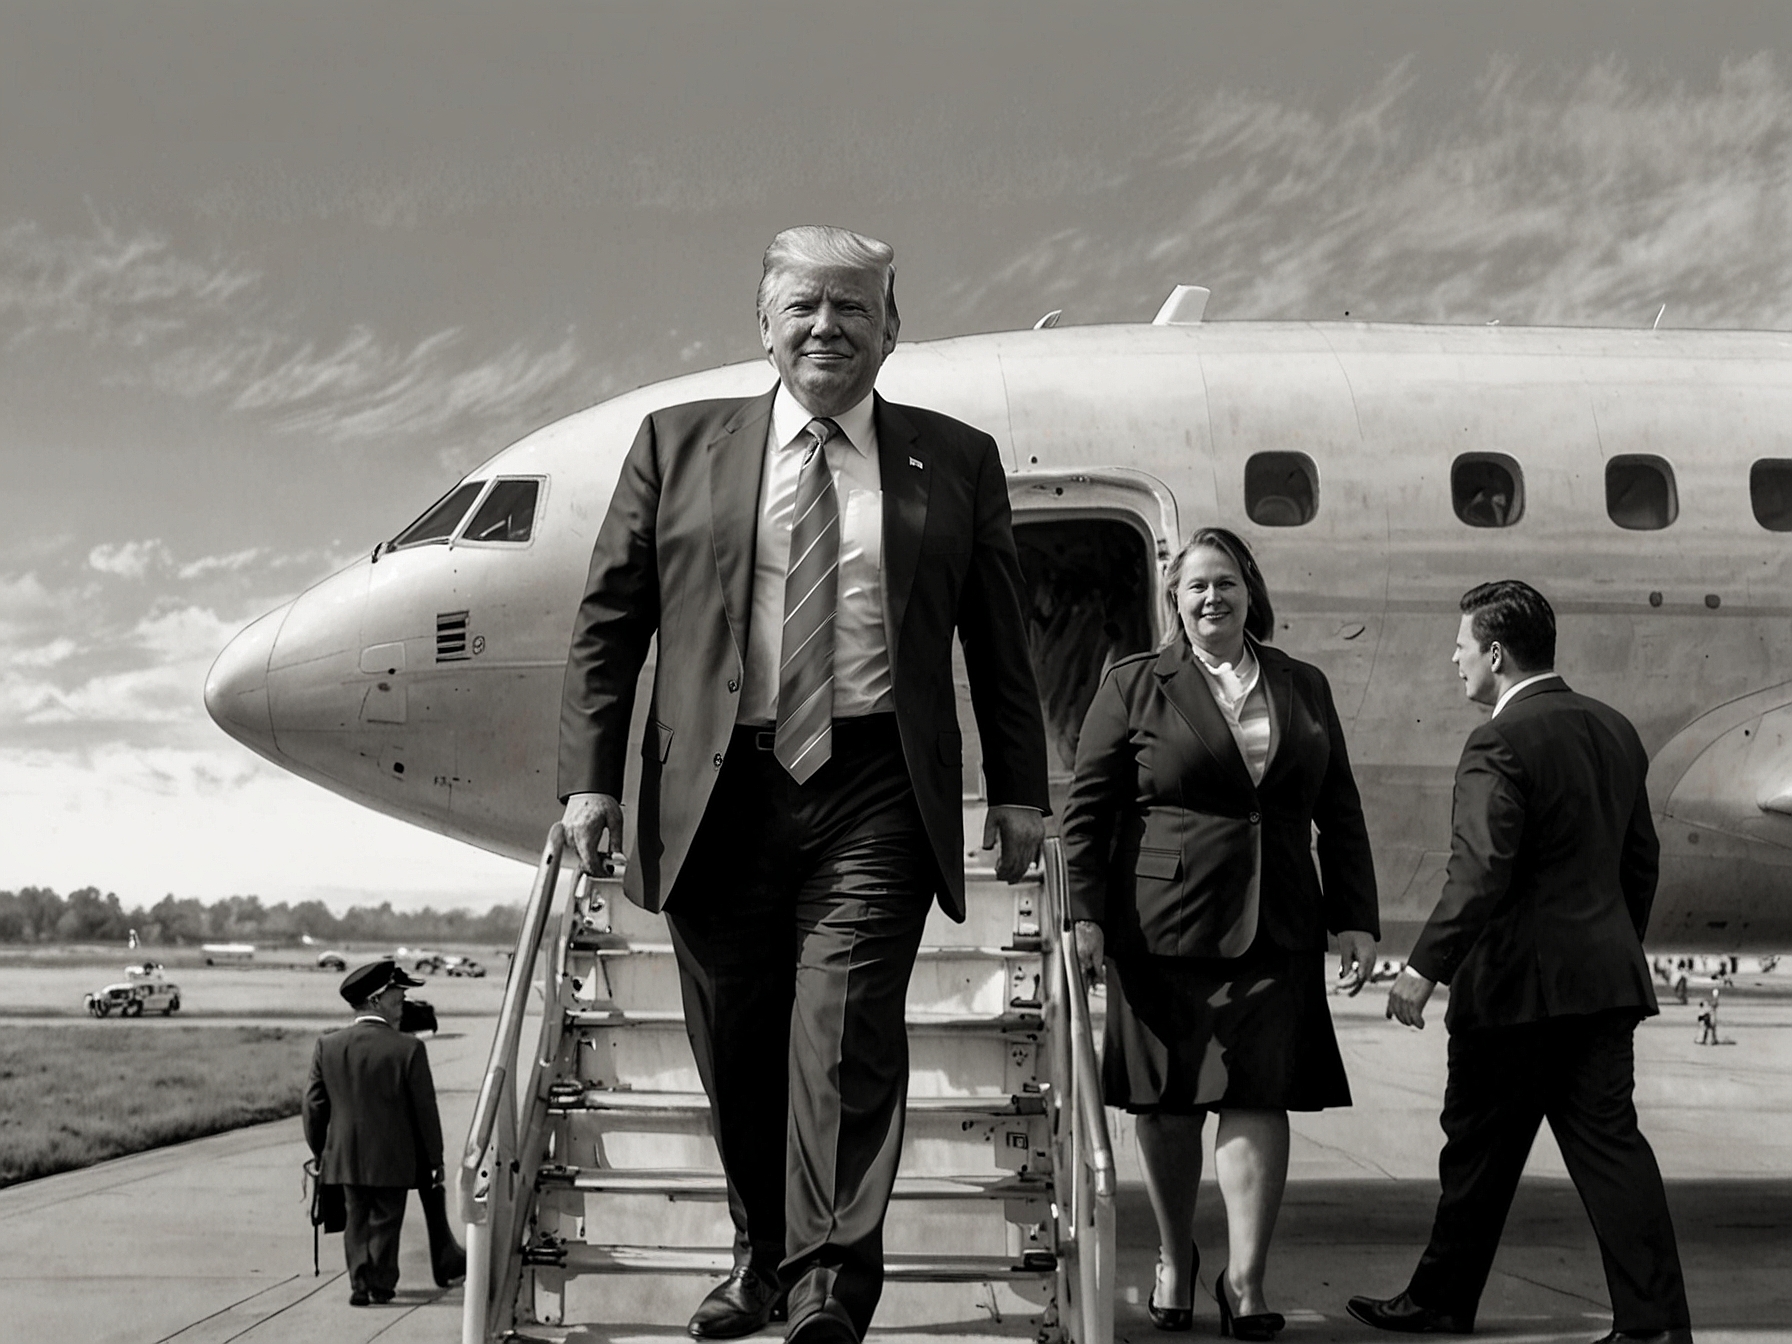 Donald Trump stepping off a plane in Atlanta, greeted by supporters and campaign staff, emphasizing his solo arrival ahead of the crucial debate.